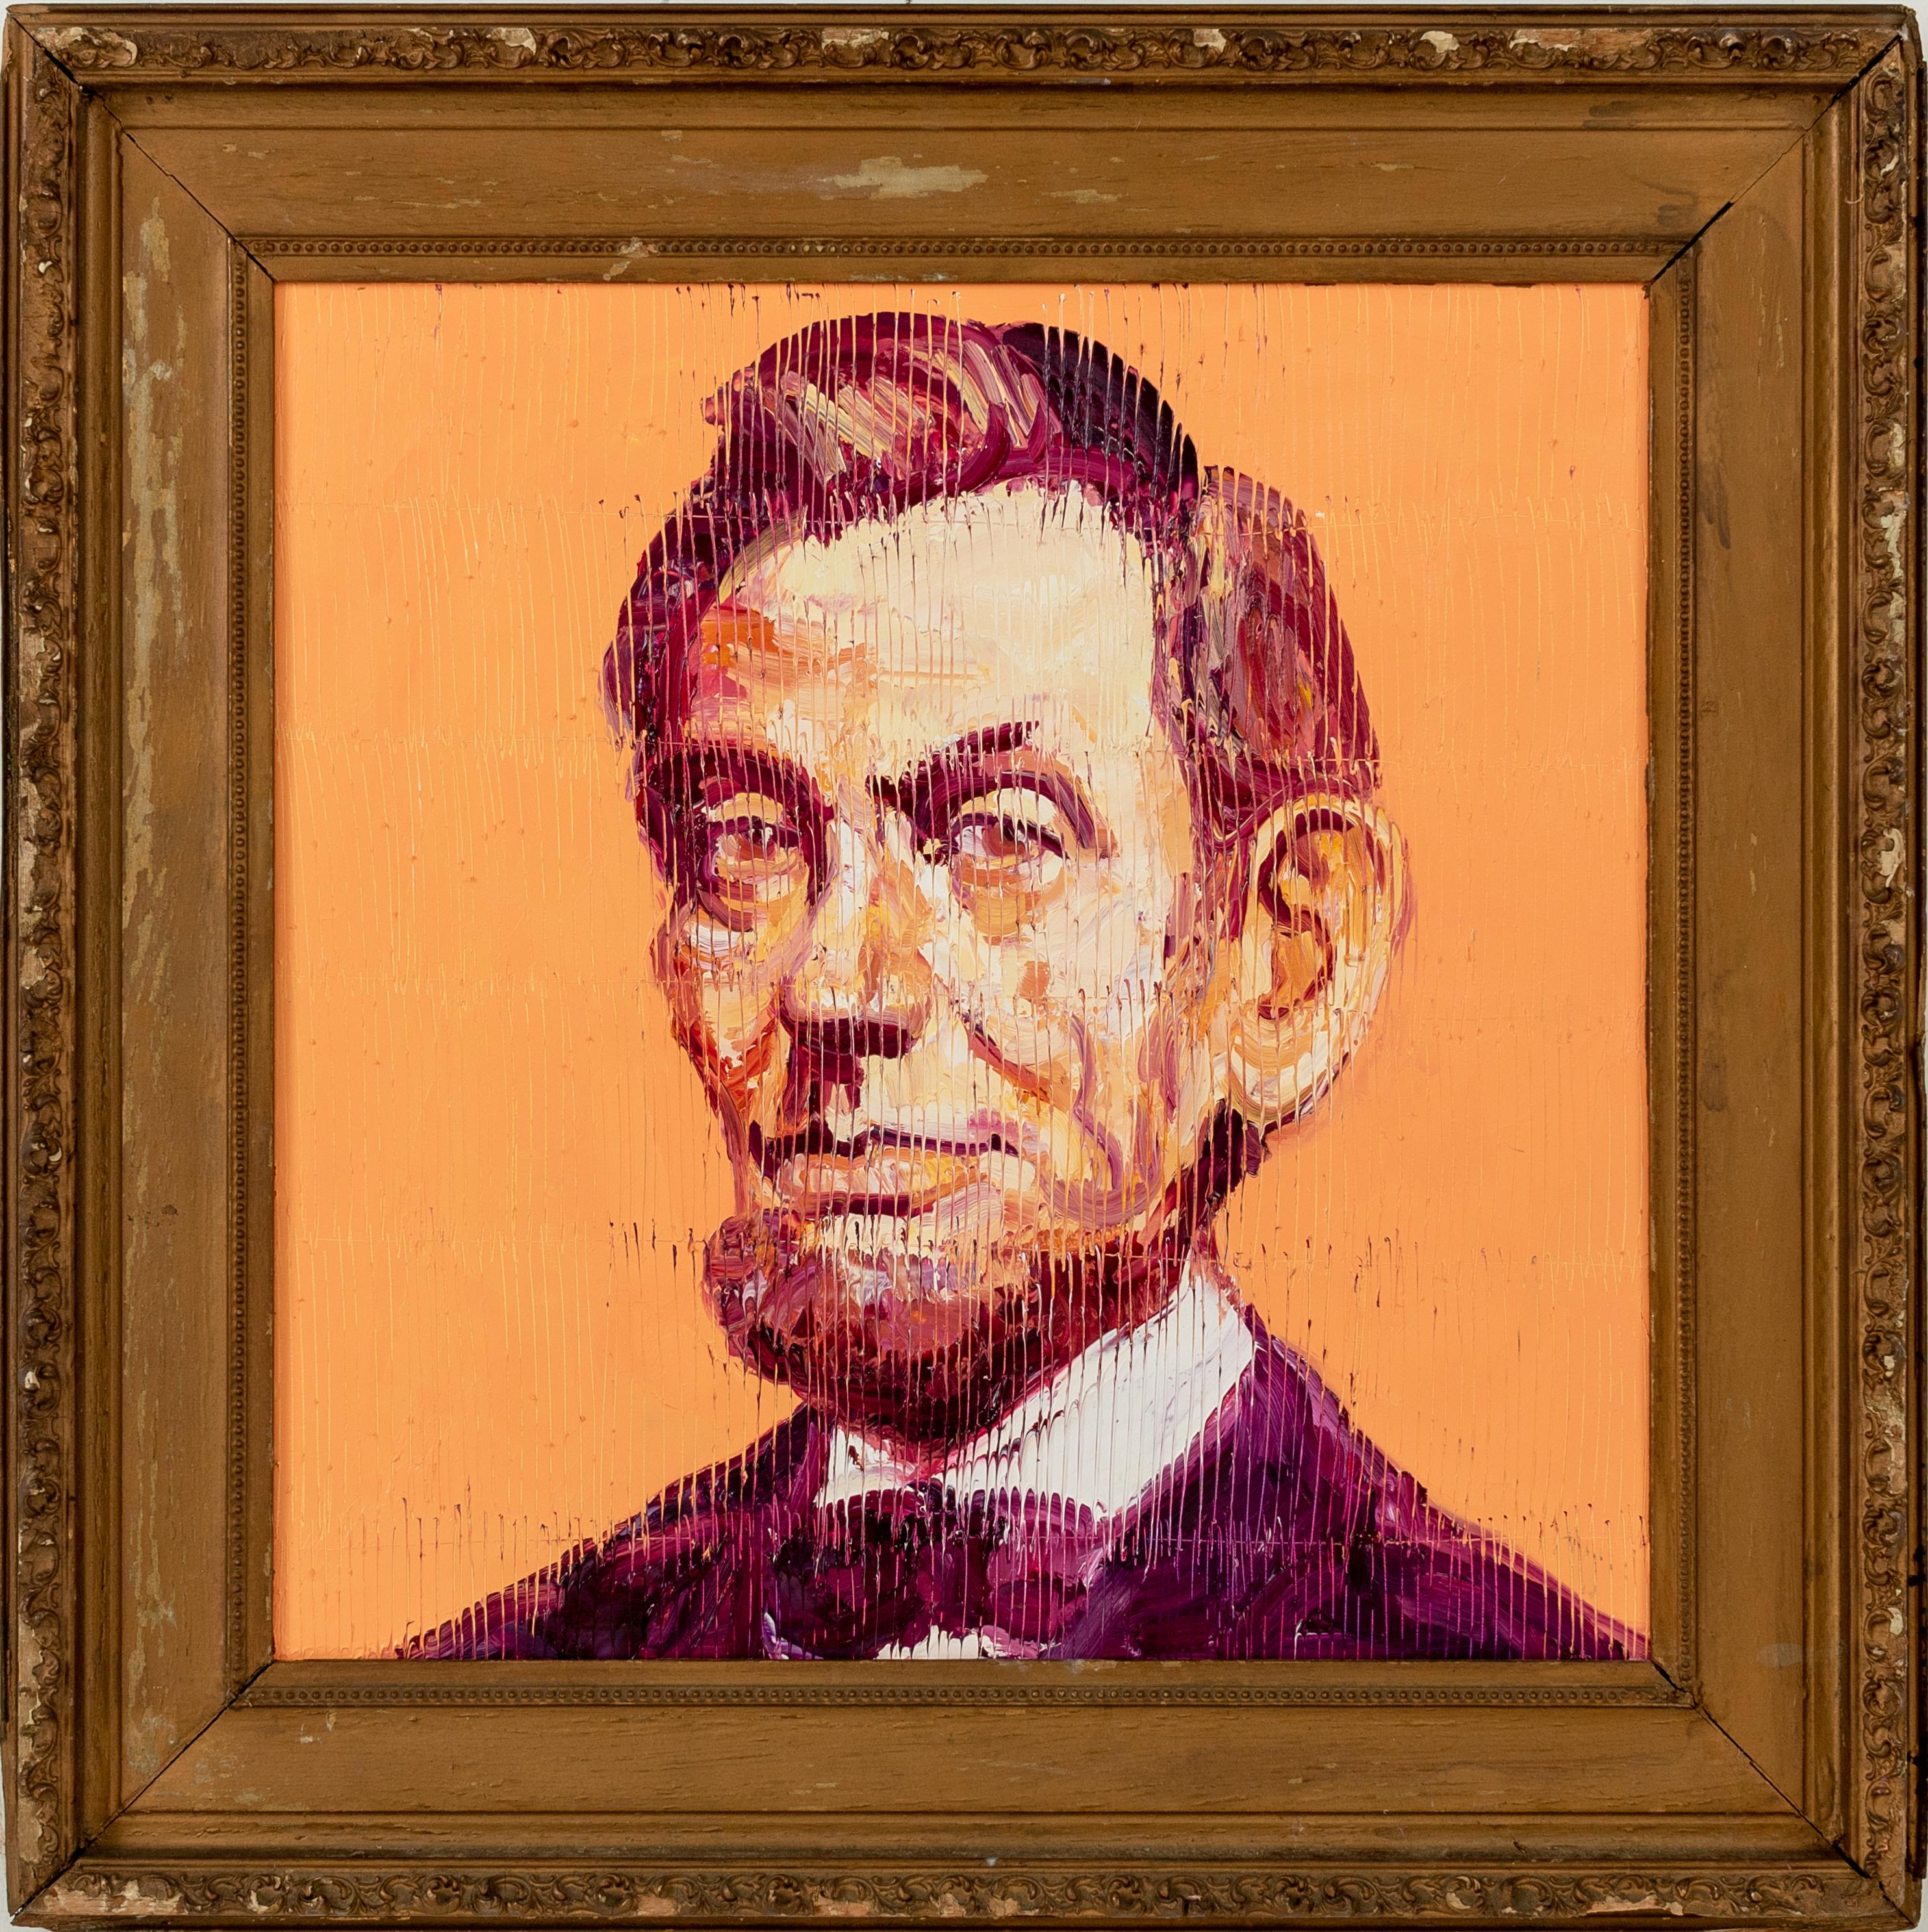 Hunt Slonem "Orange Lincoln" Peach Orange Abraham Lincoln
Peach / Orange Abraham Lincoln in a peach etched background in an antique wooden frame

Unframed: 20.25 x 20.25 inches  
Framed: 28 x 28 inches 
*Painting is framed - Please note that not all